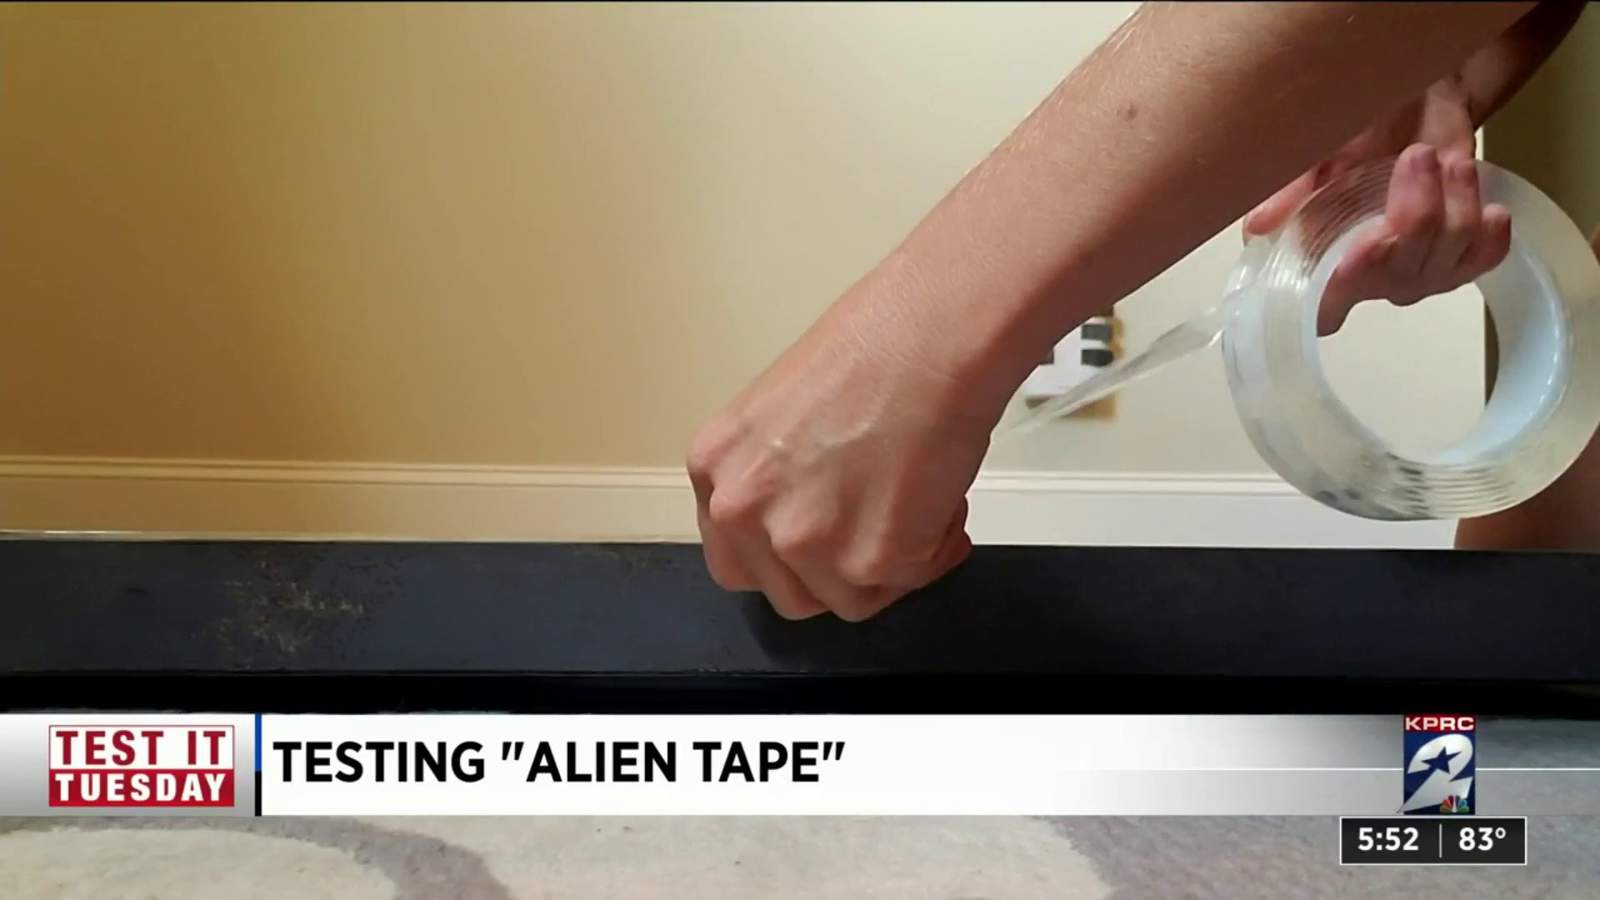 Test it Tuesday: Should you put down the hammer and nails? Alien Tape claims you won’t need them again.